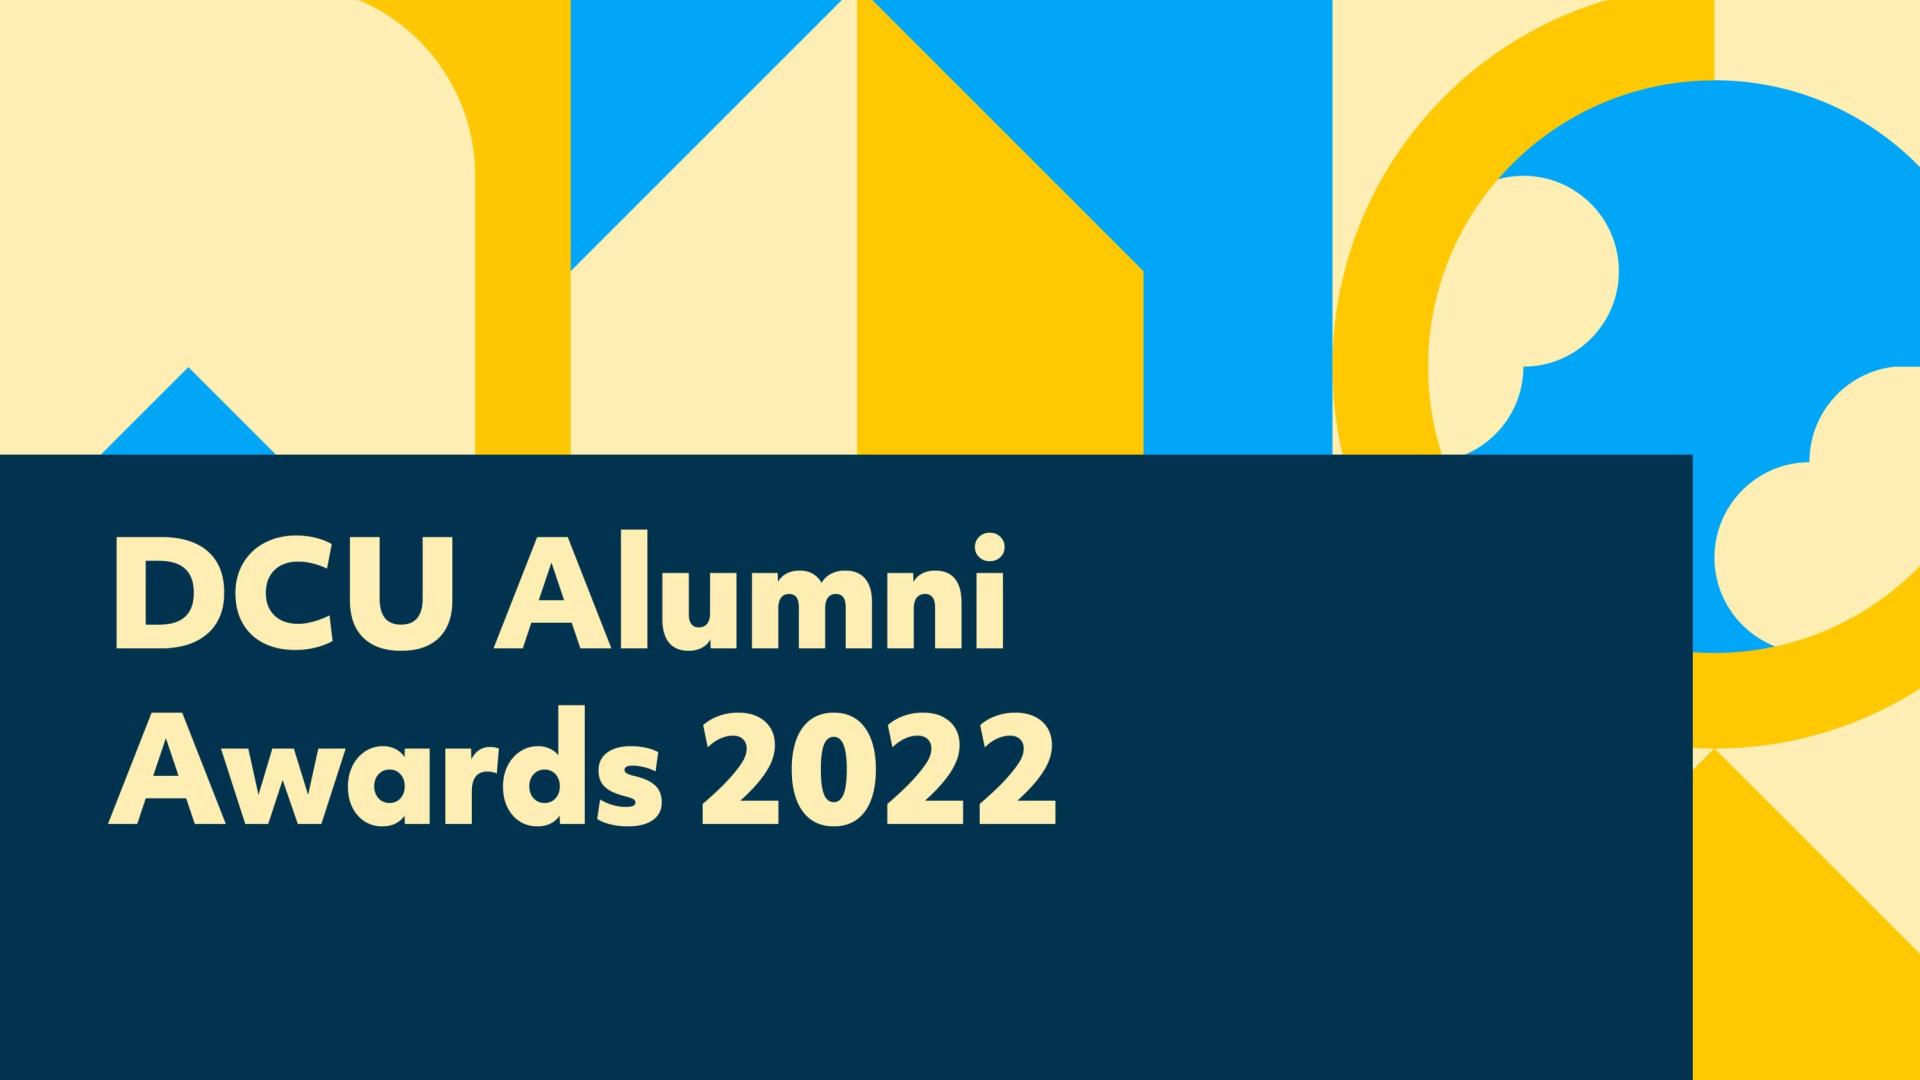 Shows graphic with text 'DCU Alumni Awards 2022'